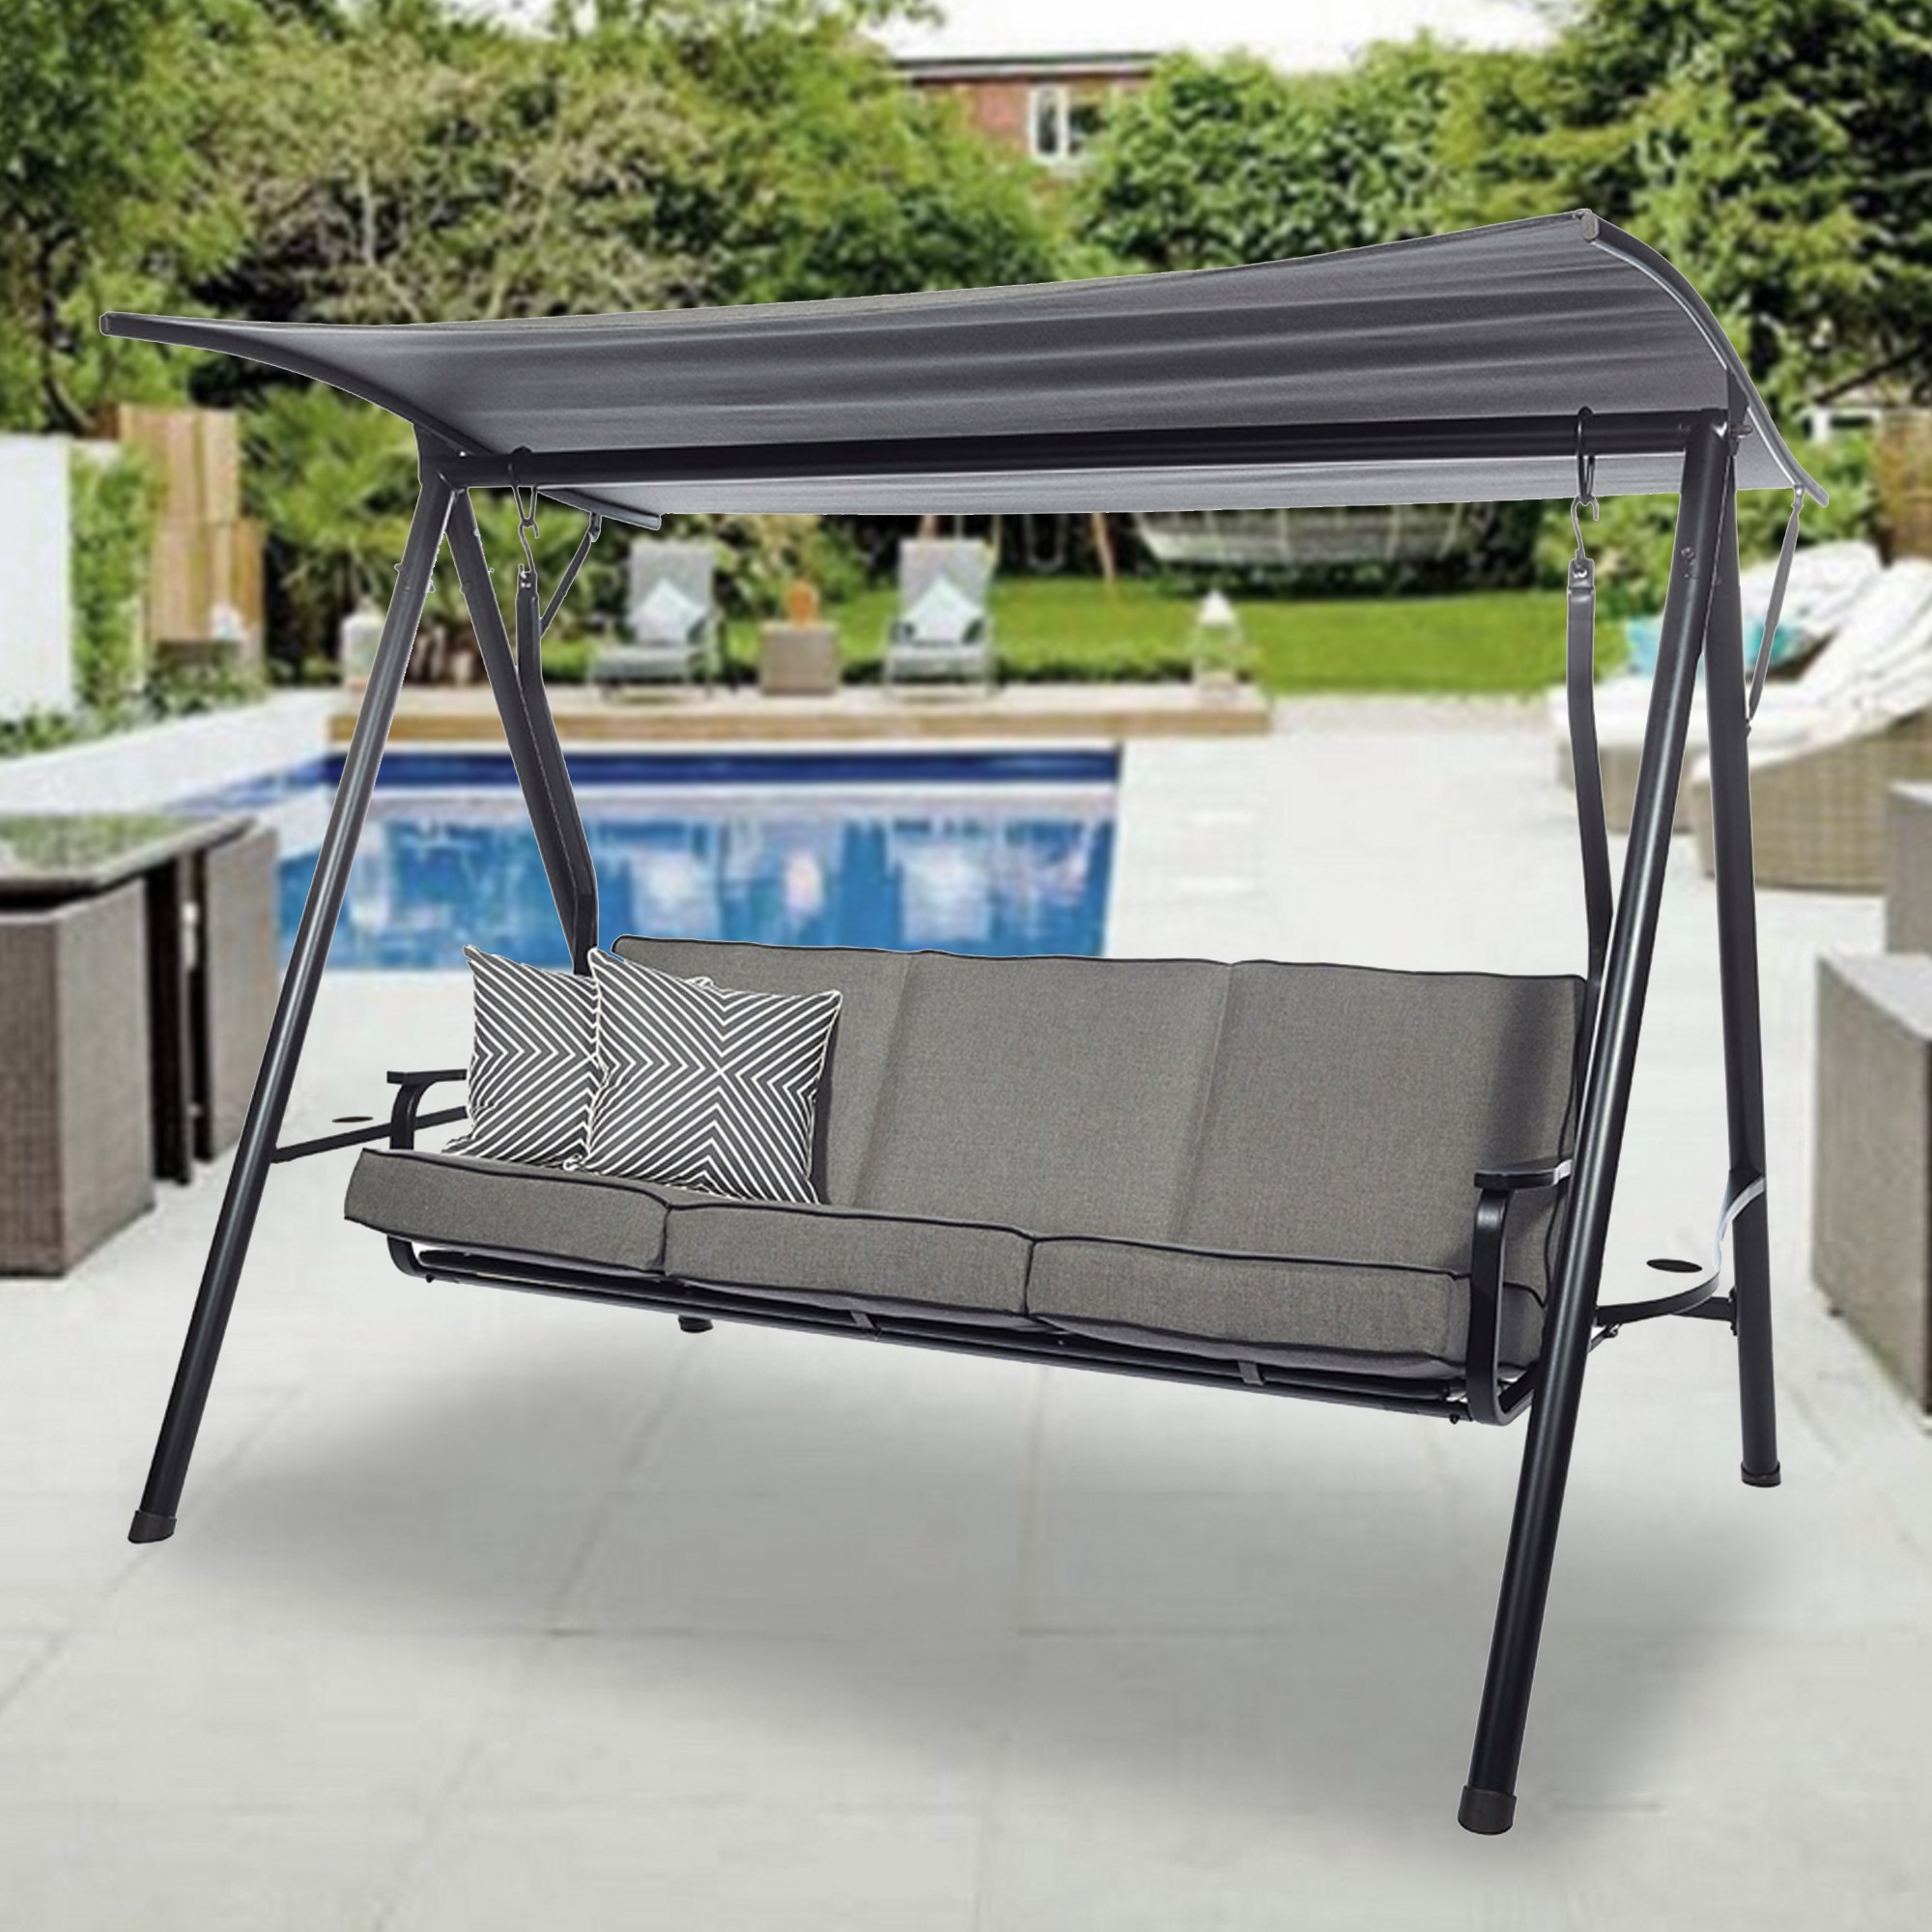 Replacement Canopy for Daybed Swing - Riplock 350